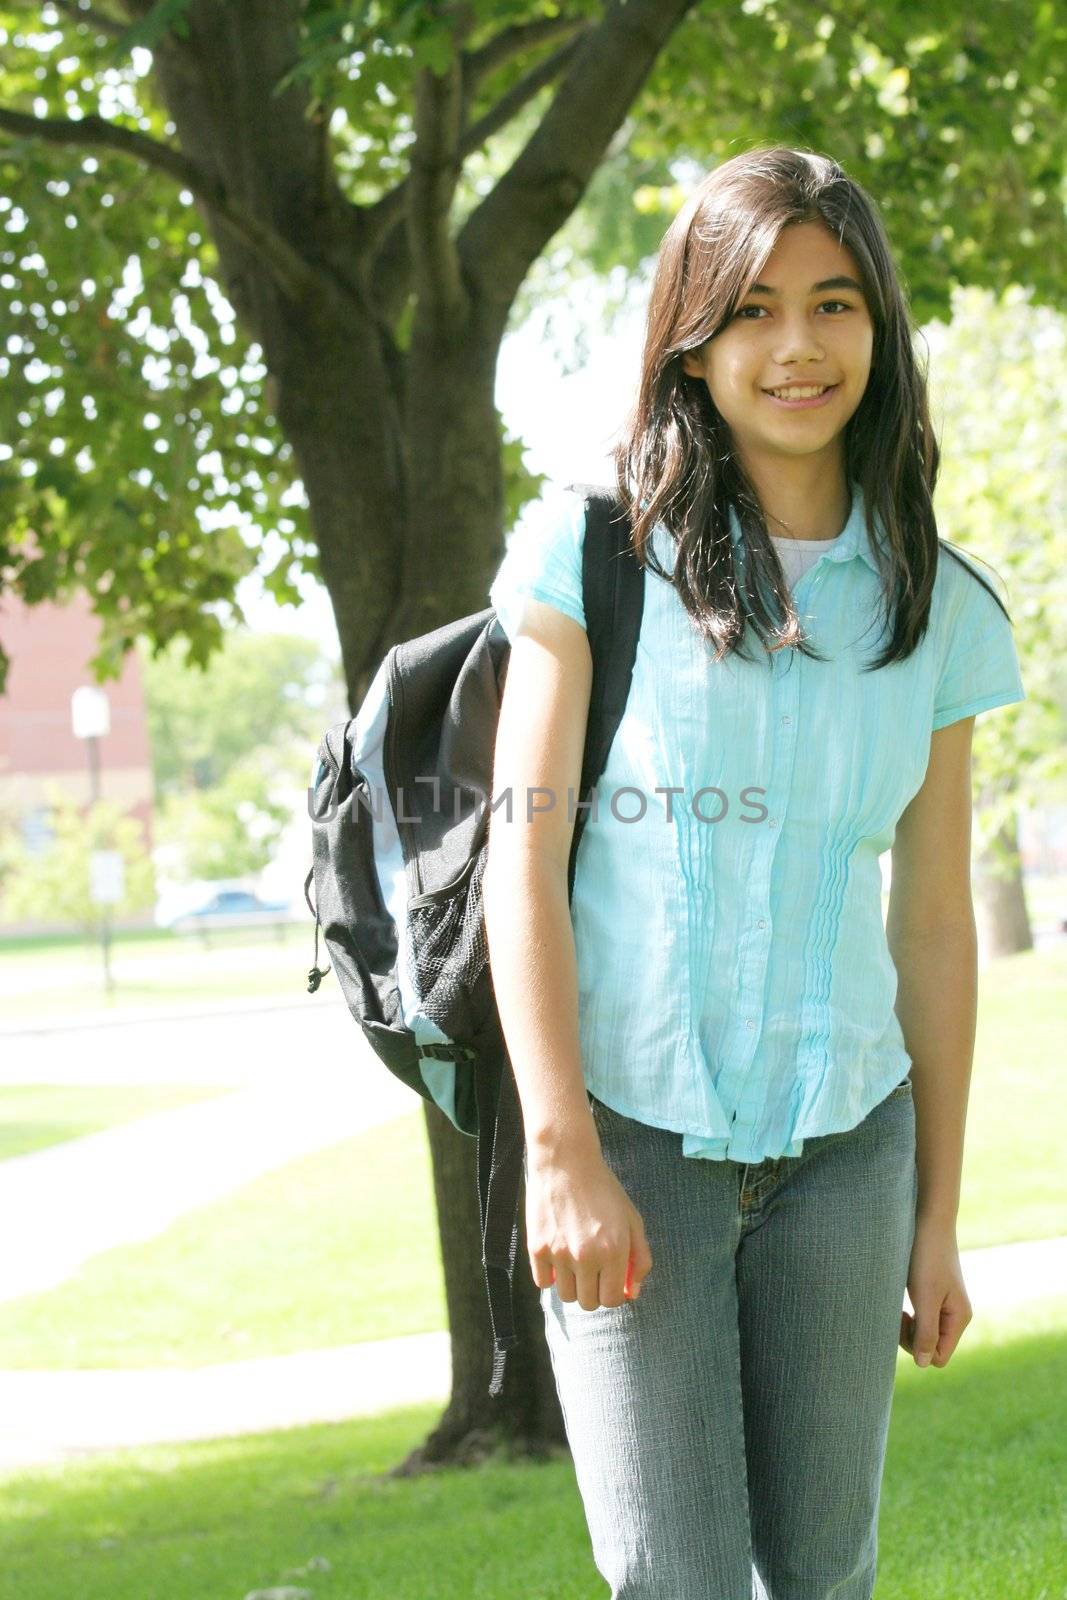 Young teen girl standing with backpack by tree, smiling.  by jarenwicklund